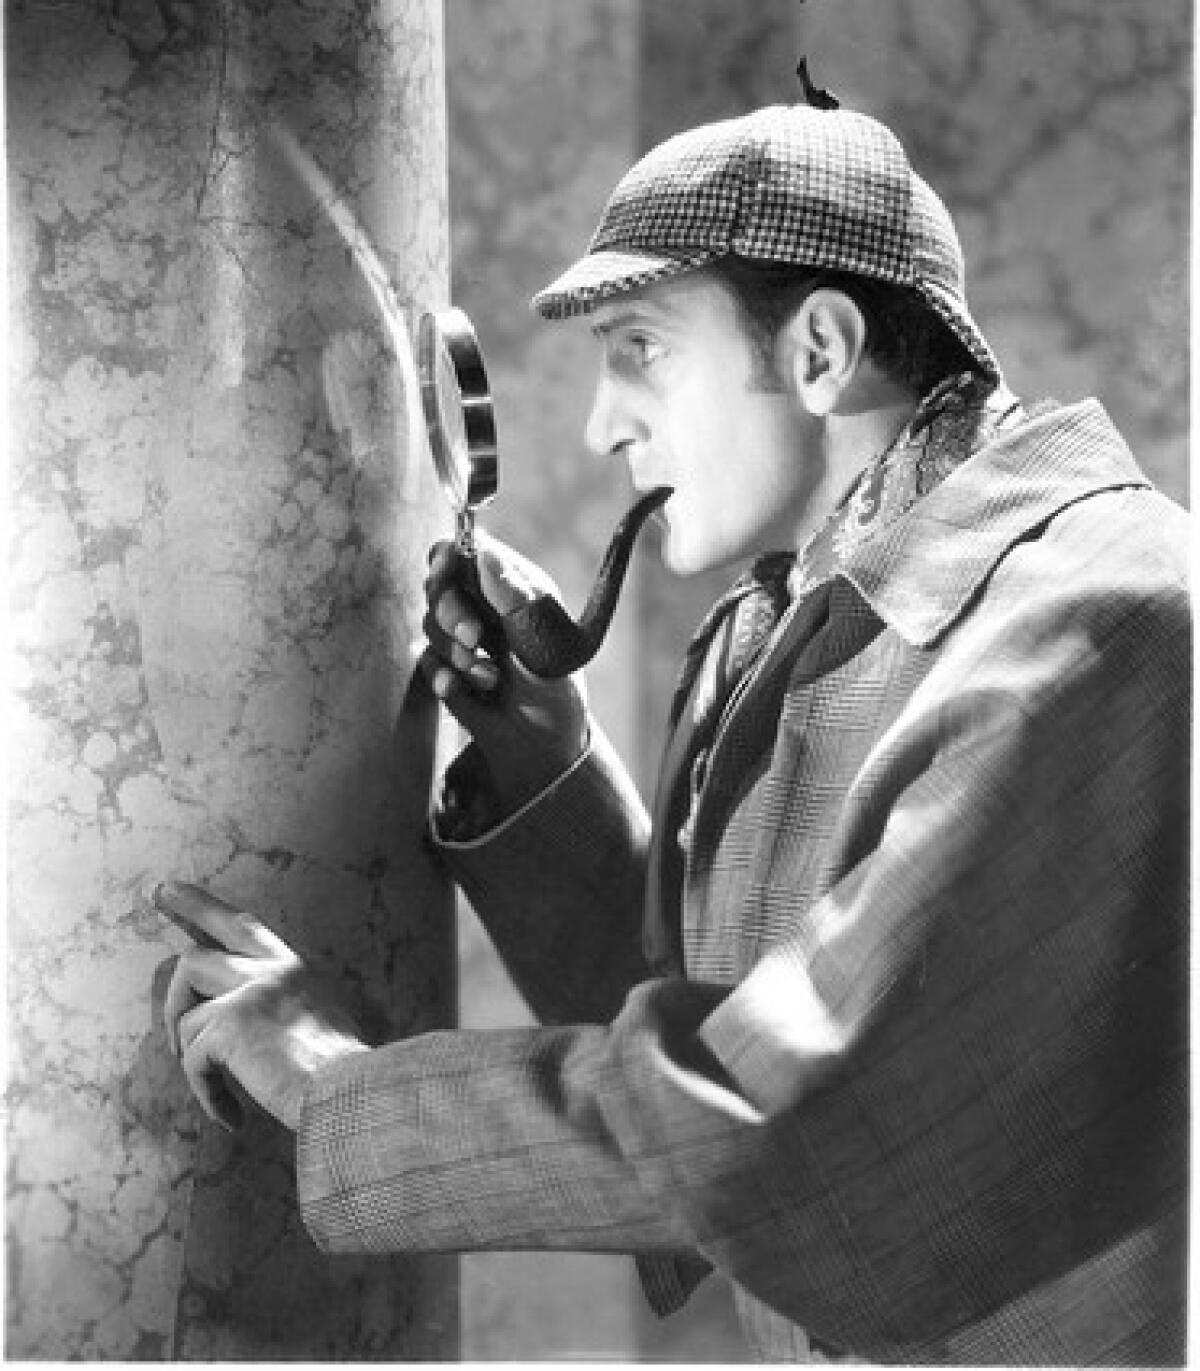 Basil Rathbone playing Sherlock Holmes in 1939's "The Hound of the Baskervilles."